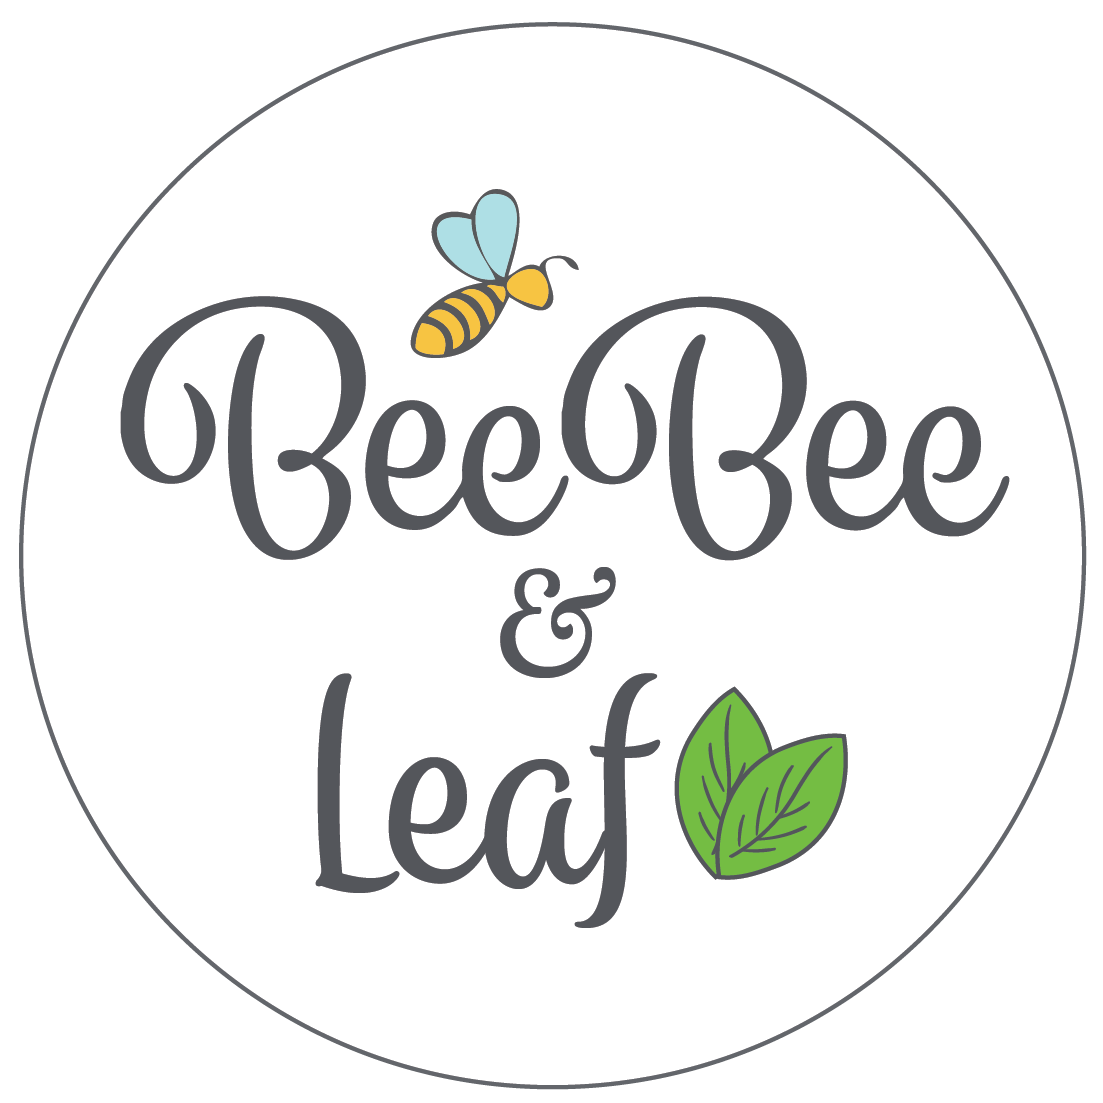 https://www.jbs.cam.ac.uk/wp-content/uploads/2023/05/beebee-and-leaf-254x127-1-3.png